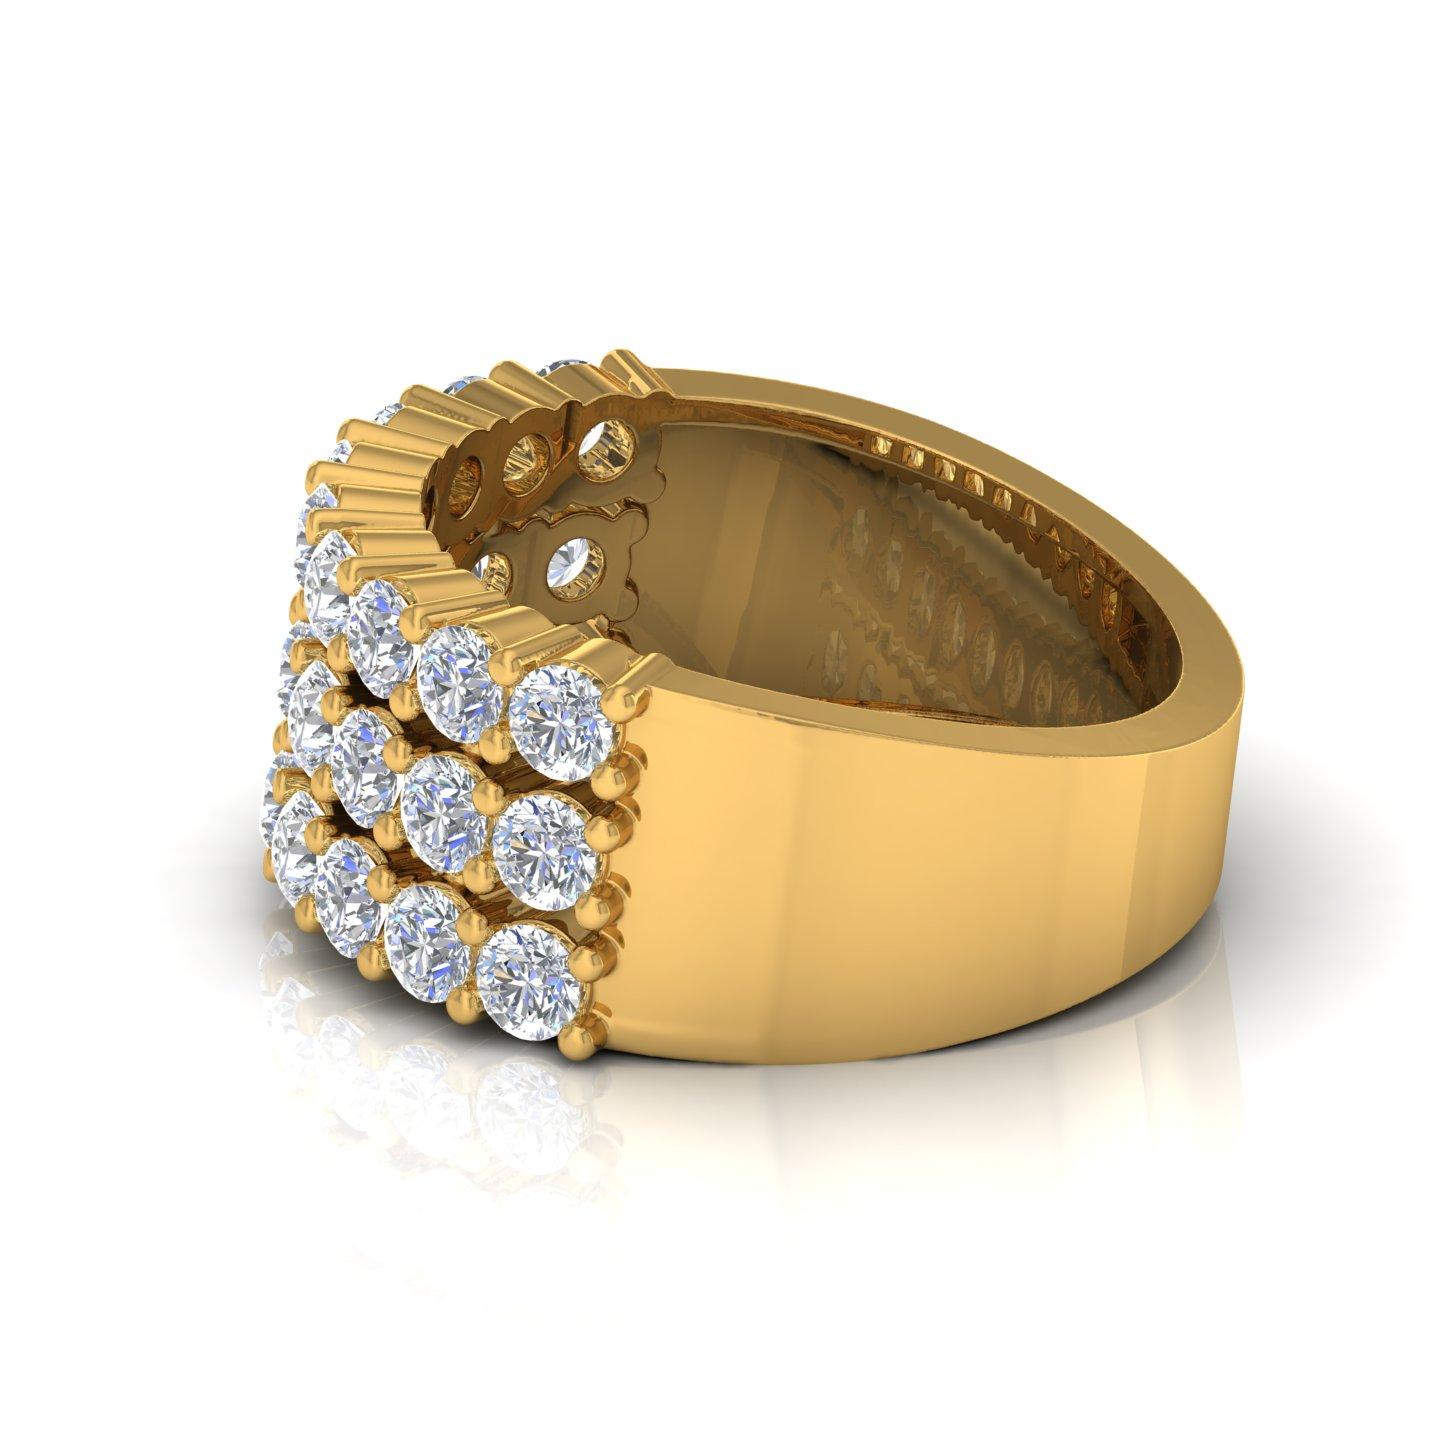 For Sale:  2.05 Carat SI Clarity HI Color Diamond Dome Ring 14 Karat Yellow Gold Jewelry 4